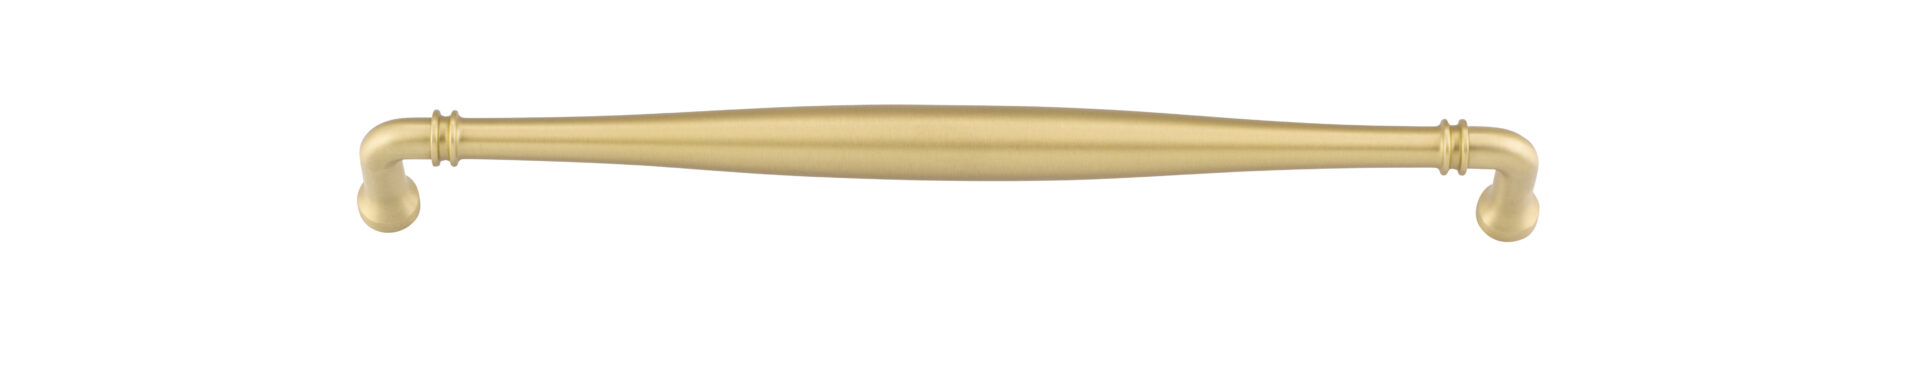 17107 - Sarlat Cabinet Pull - CTC320mm - Brushed Gold PVD